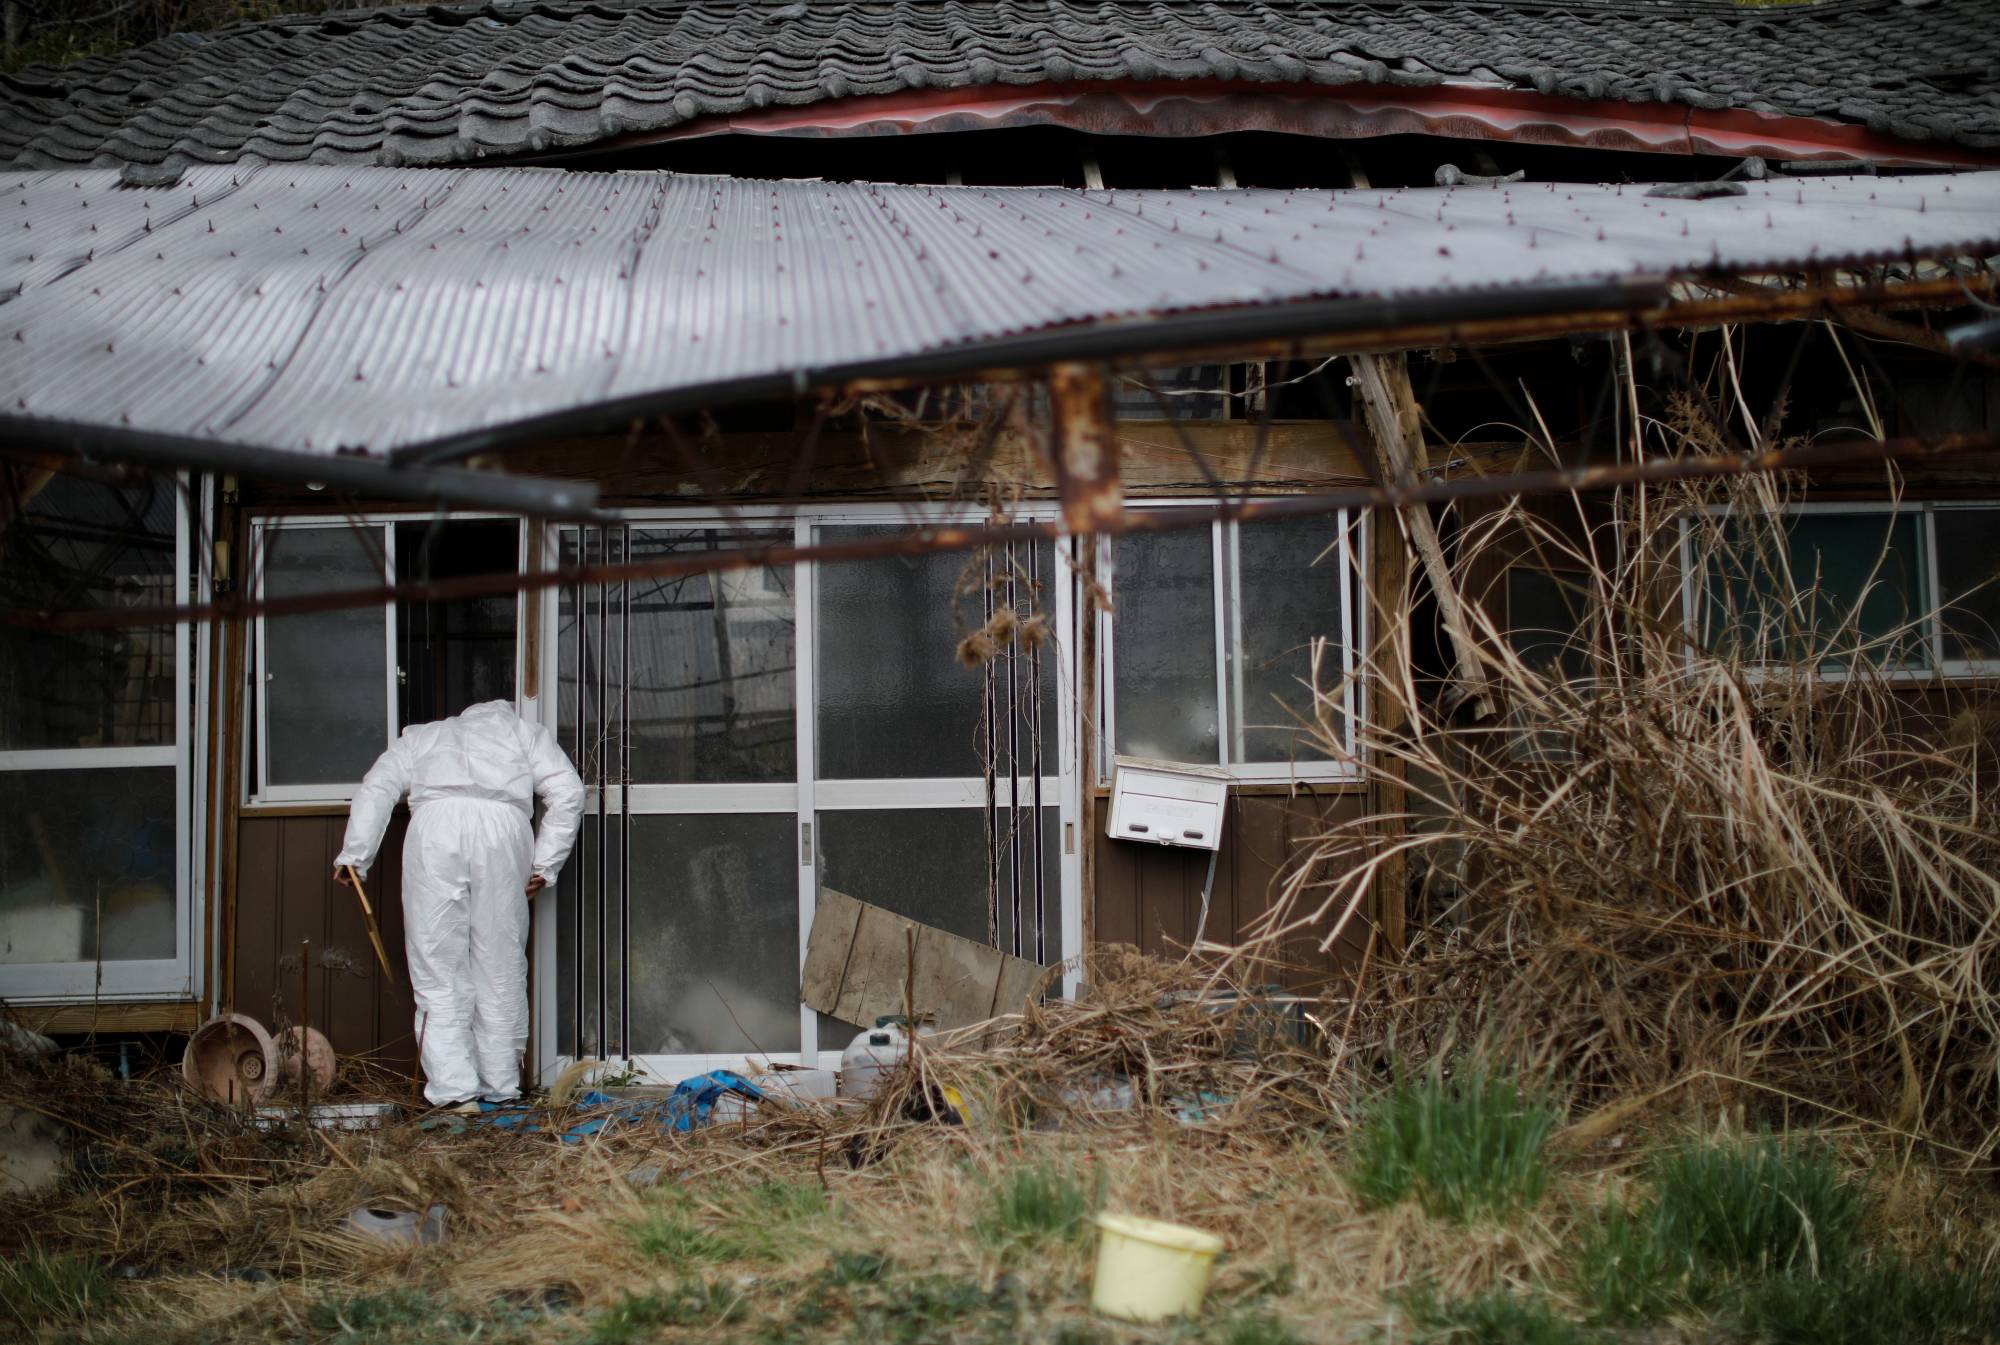 Hisae Unuma looks into the house that she lived in, 2.5 kilometers away from the crippled Fukushima No. 1 nuclear power plant, before being evacuated in March 2011. | REUTERS